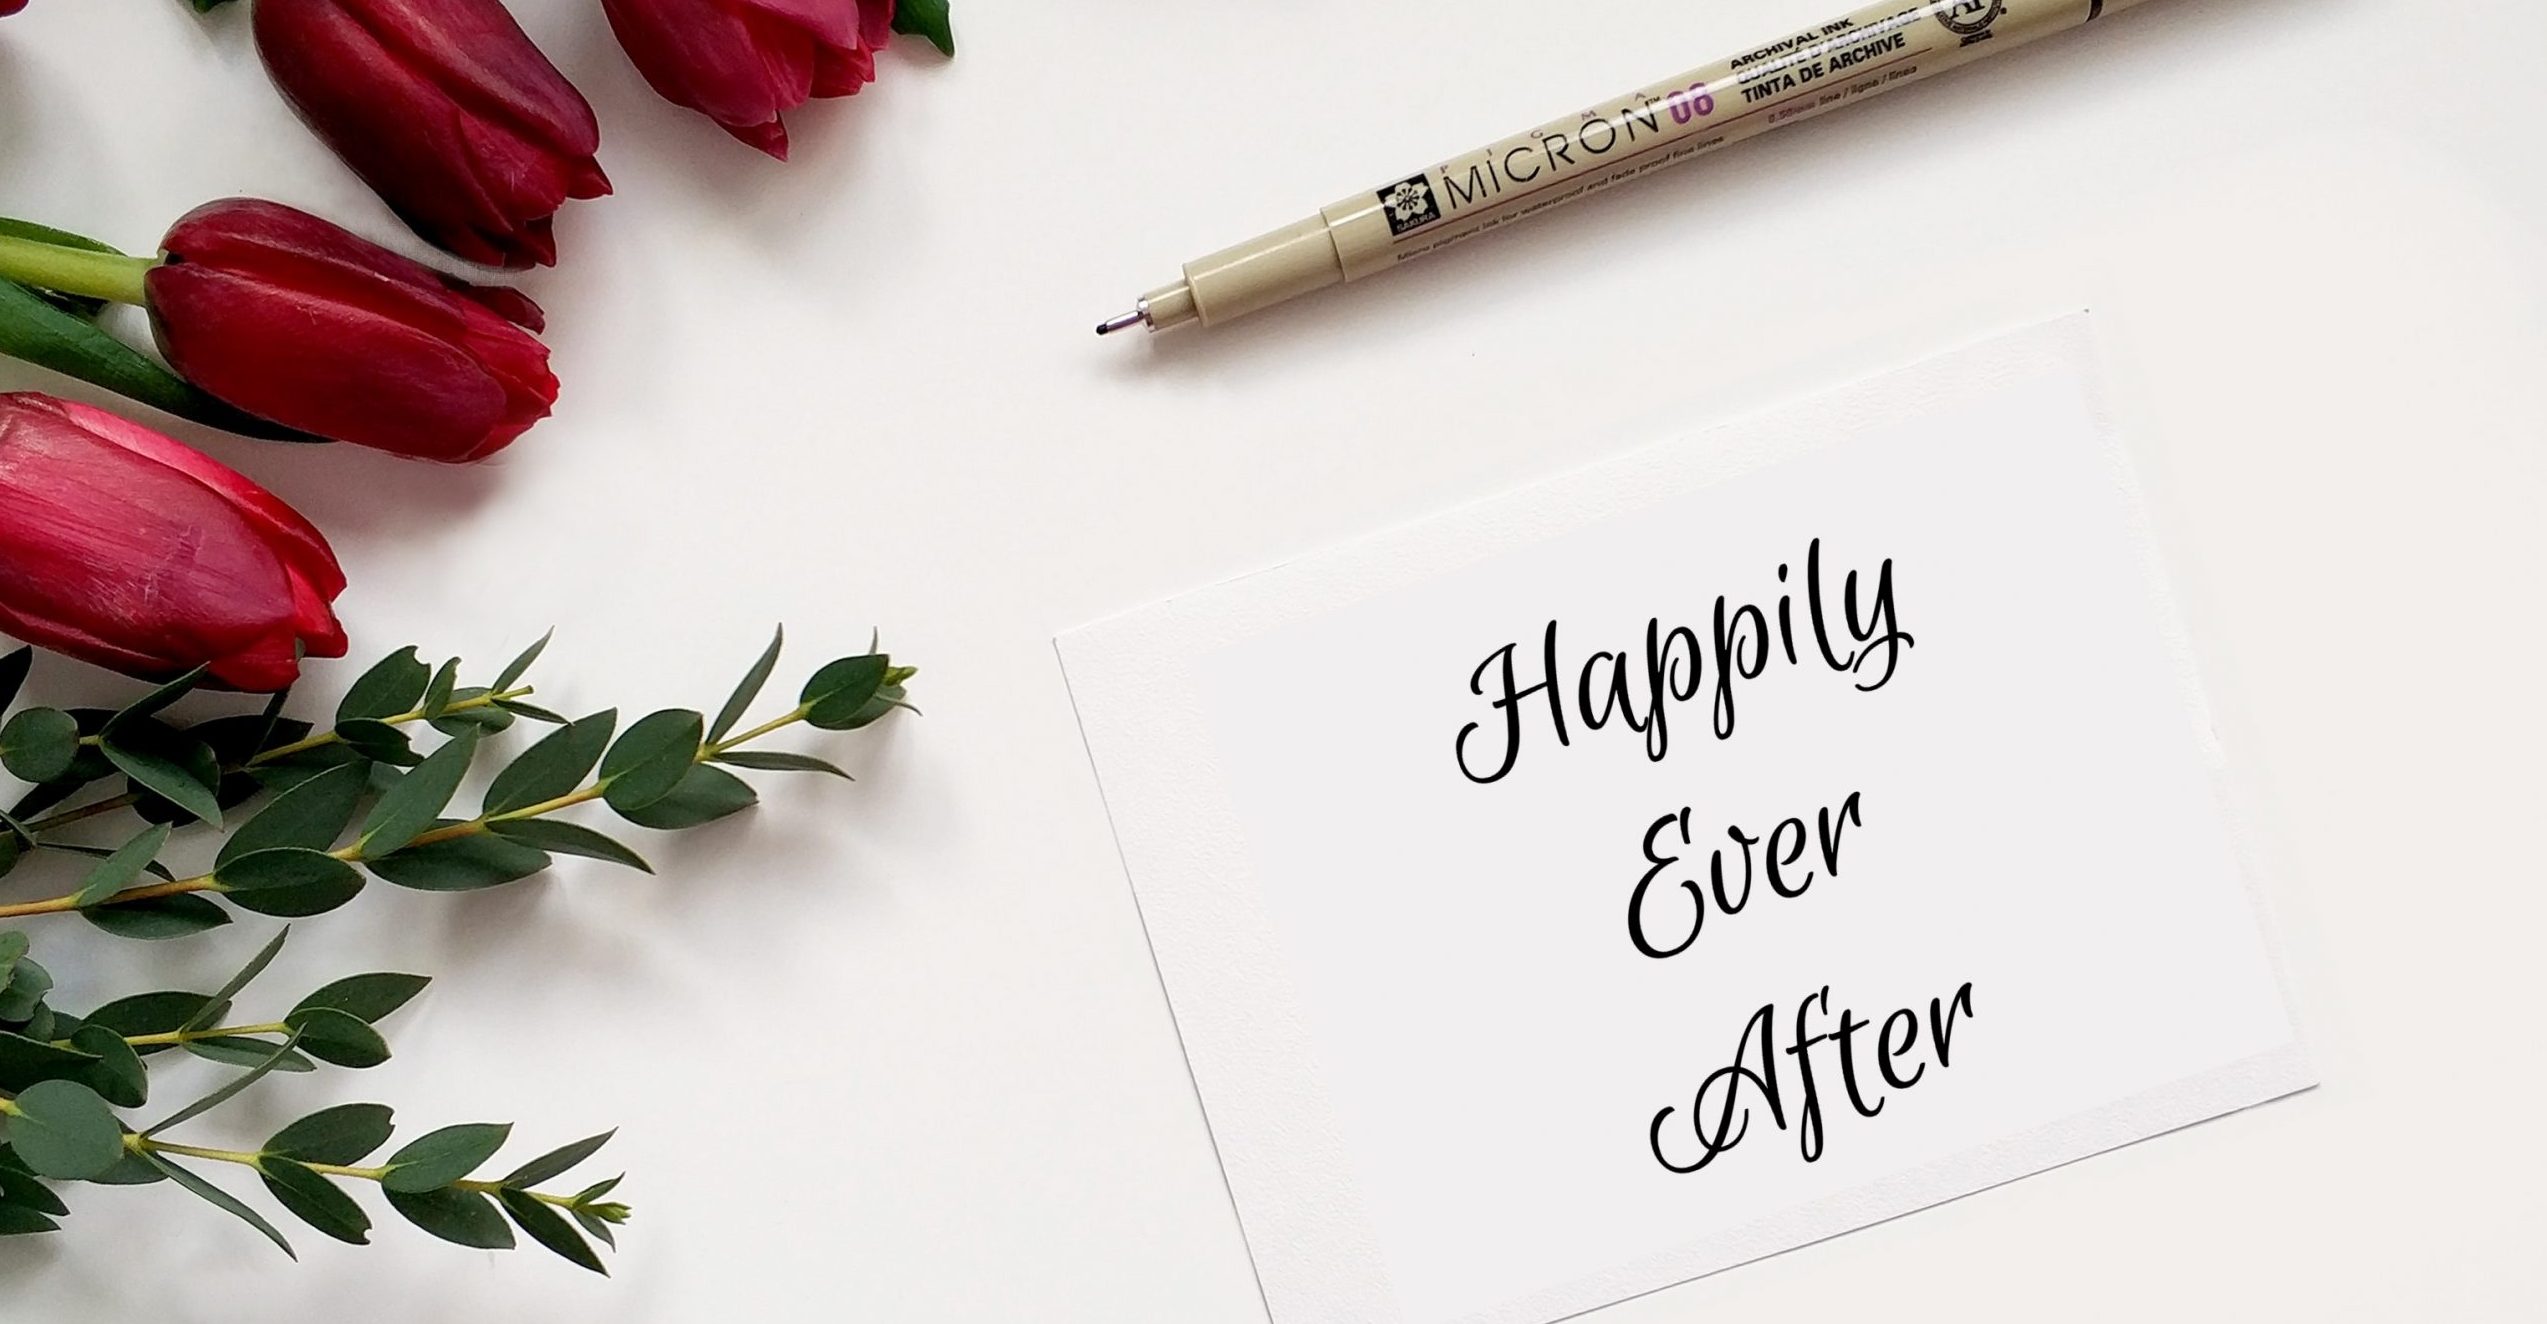 What to Write in a Wedding Card? Funny & Thoughtful Wedding Wishes